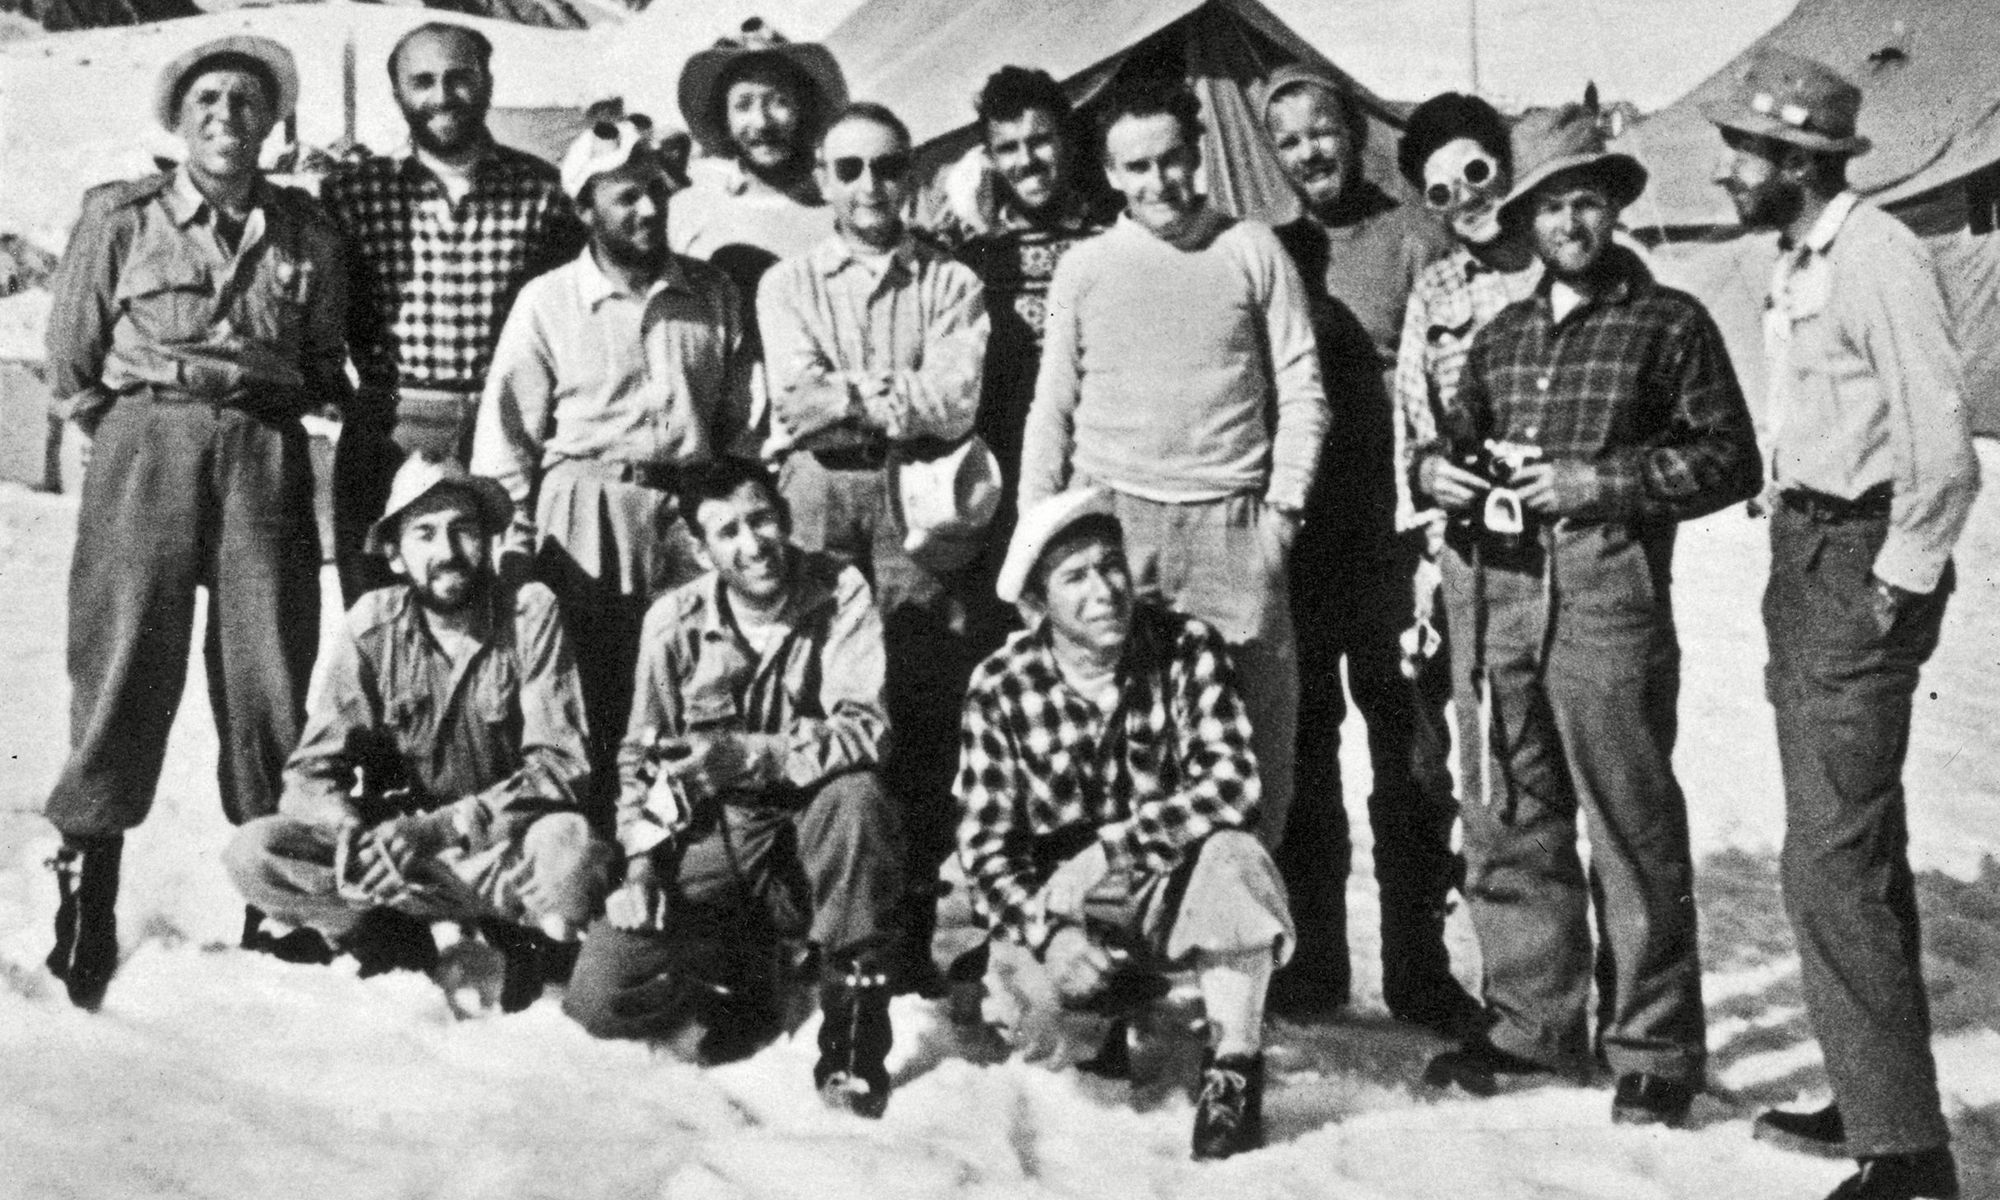 The Italian Expedition team at K2 Base Camp in 1954